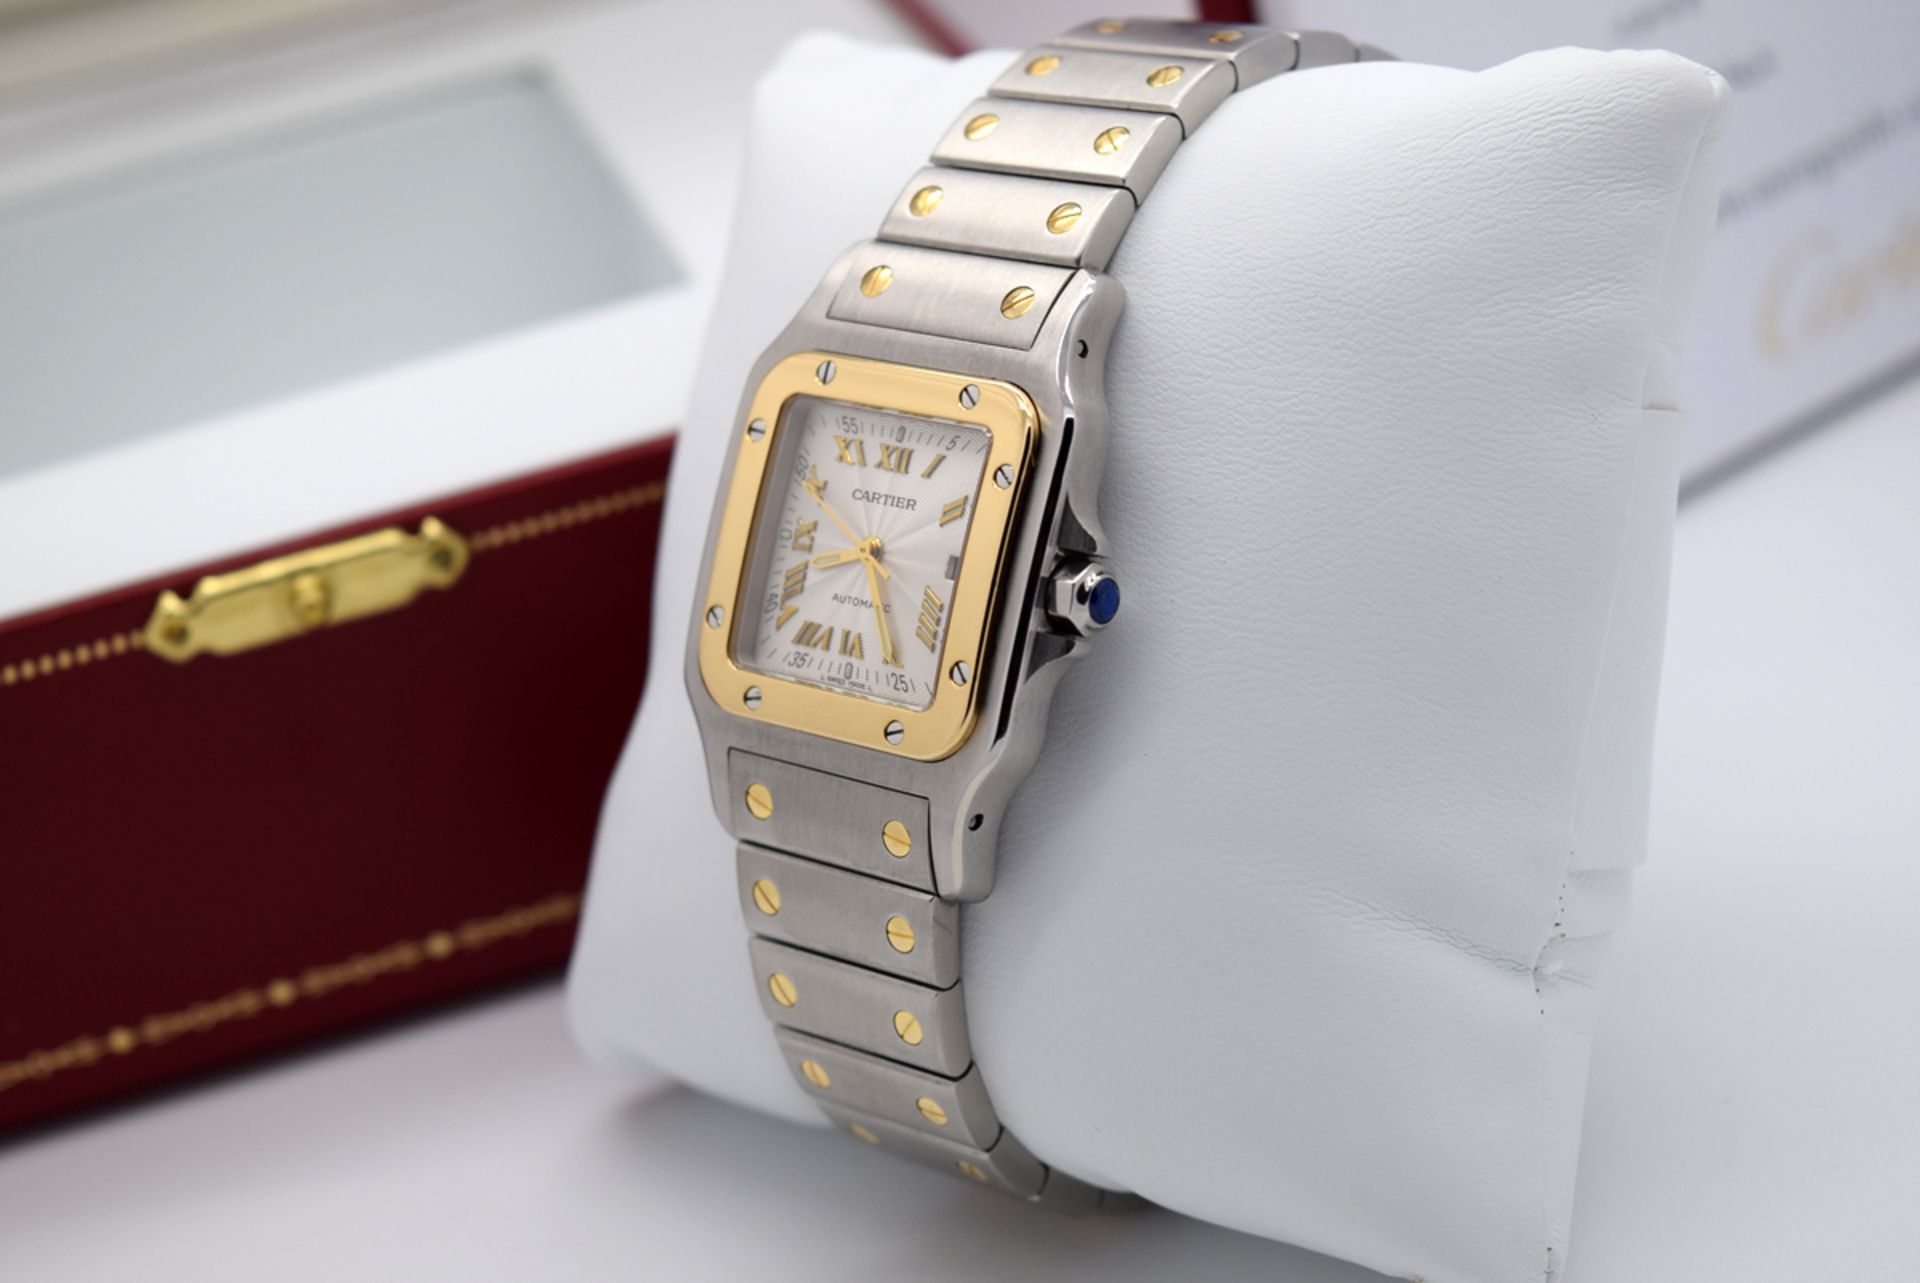 *Large* Cartier Santos 'Galbee' 18k Gold and Steel Model - Anniversary Dial! - Image 6 of 10